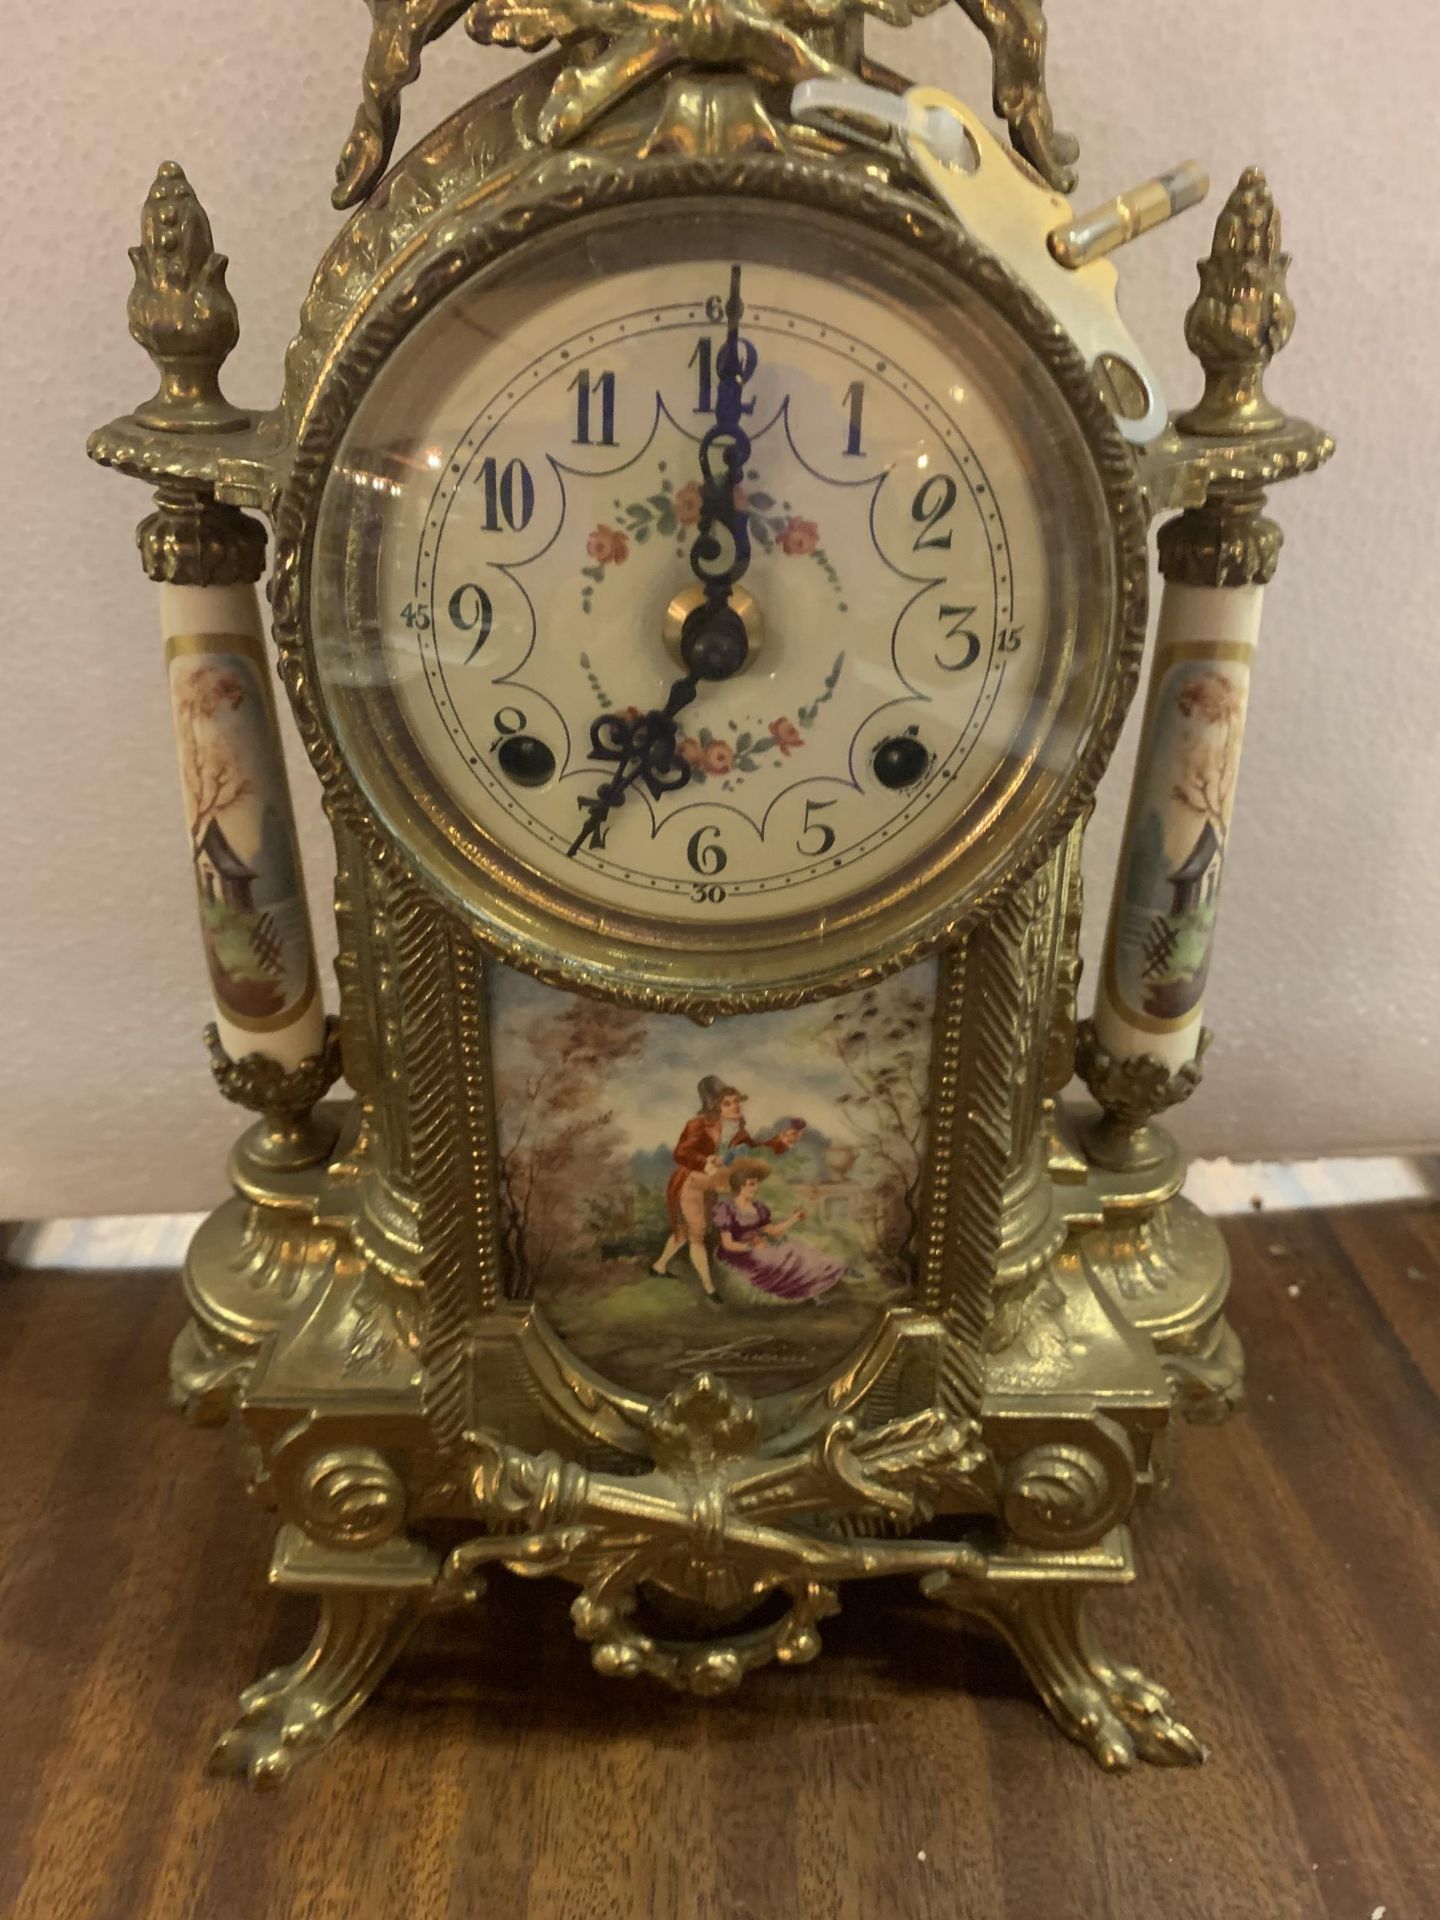 A DECORATIVE MANTLE CLOCK WITH A COURTING COUPLE DESIGN, GARNITURES AND KEY - Image 3 of 5